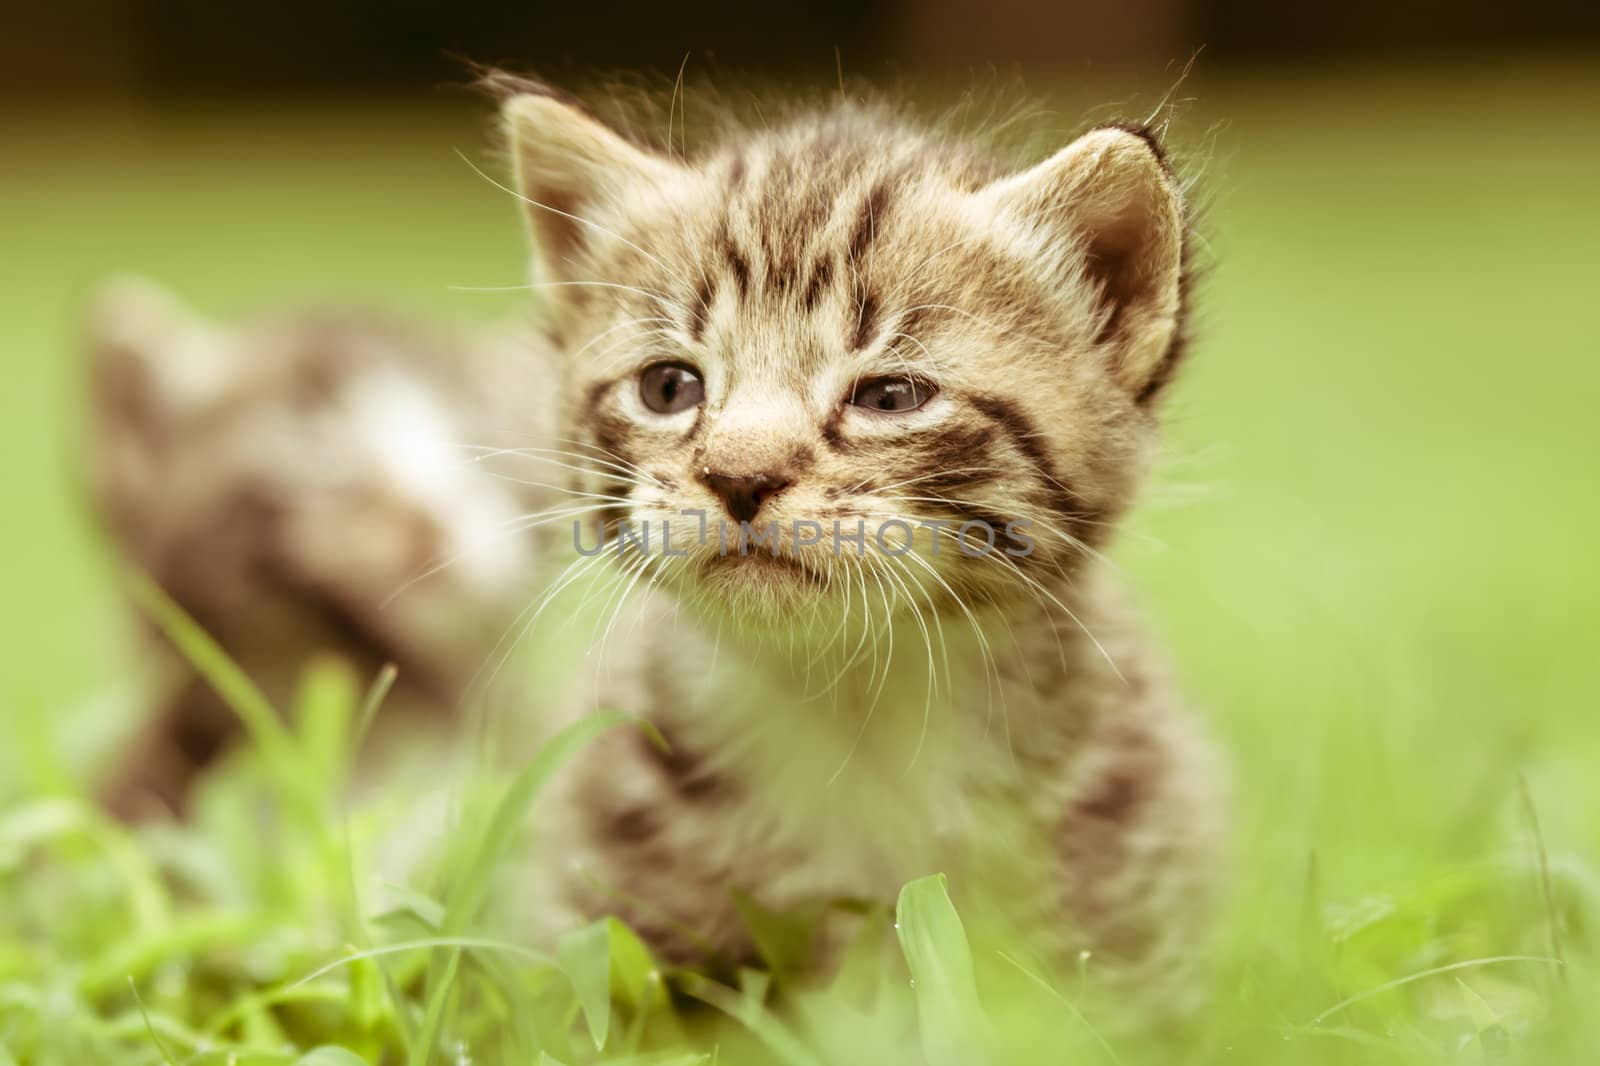 Adorable little kittens a great pet to adopt and own by digidreamgrafix